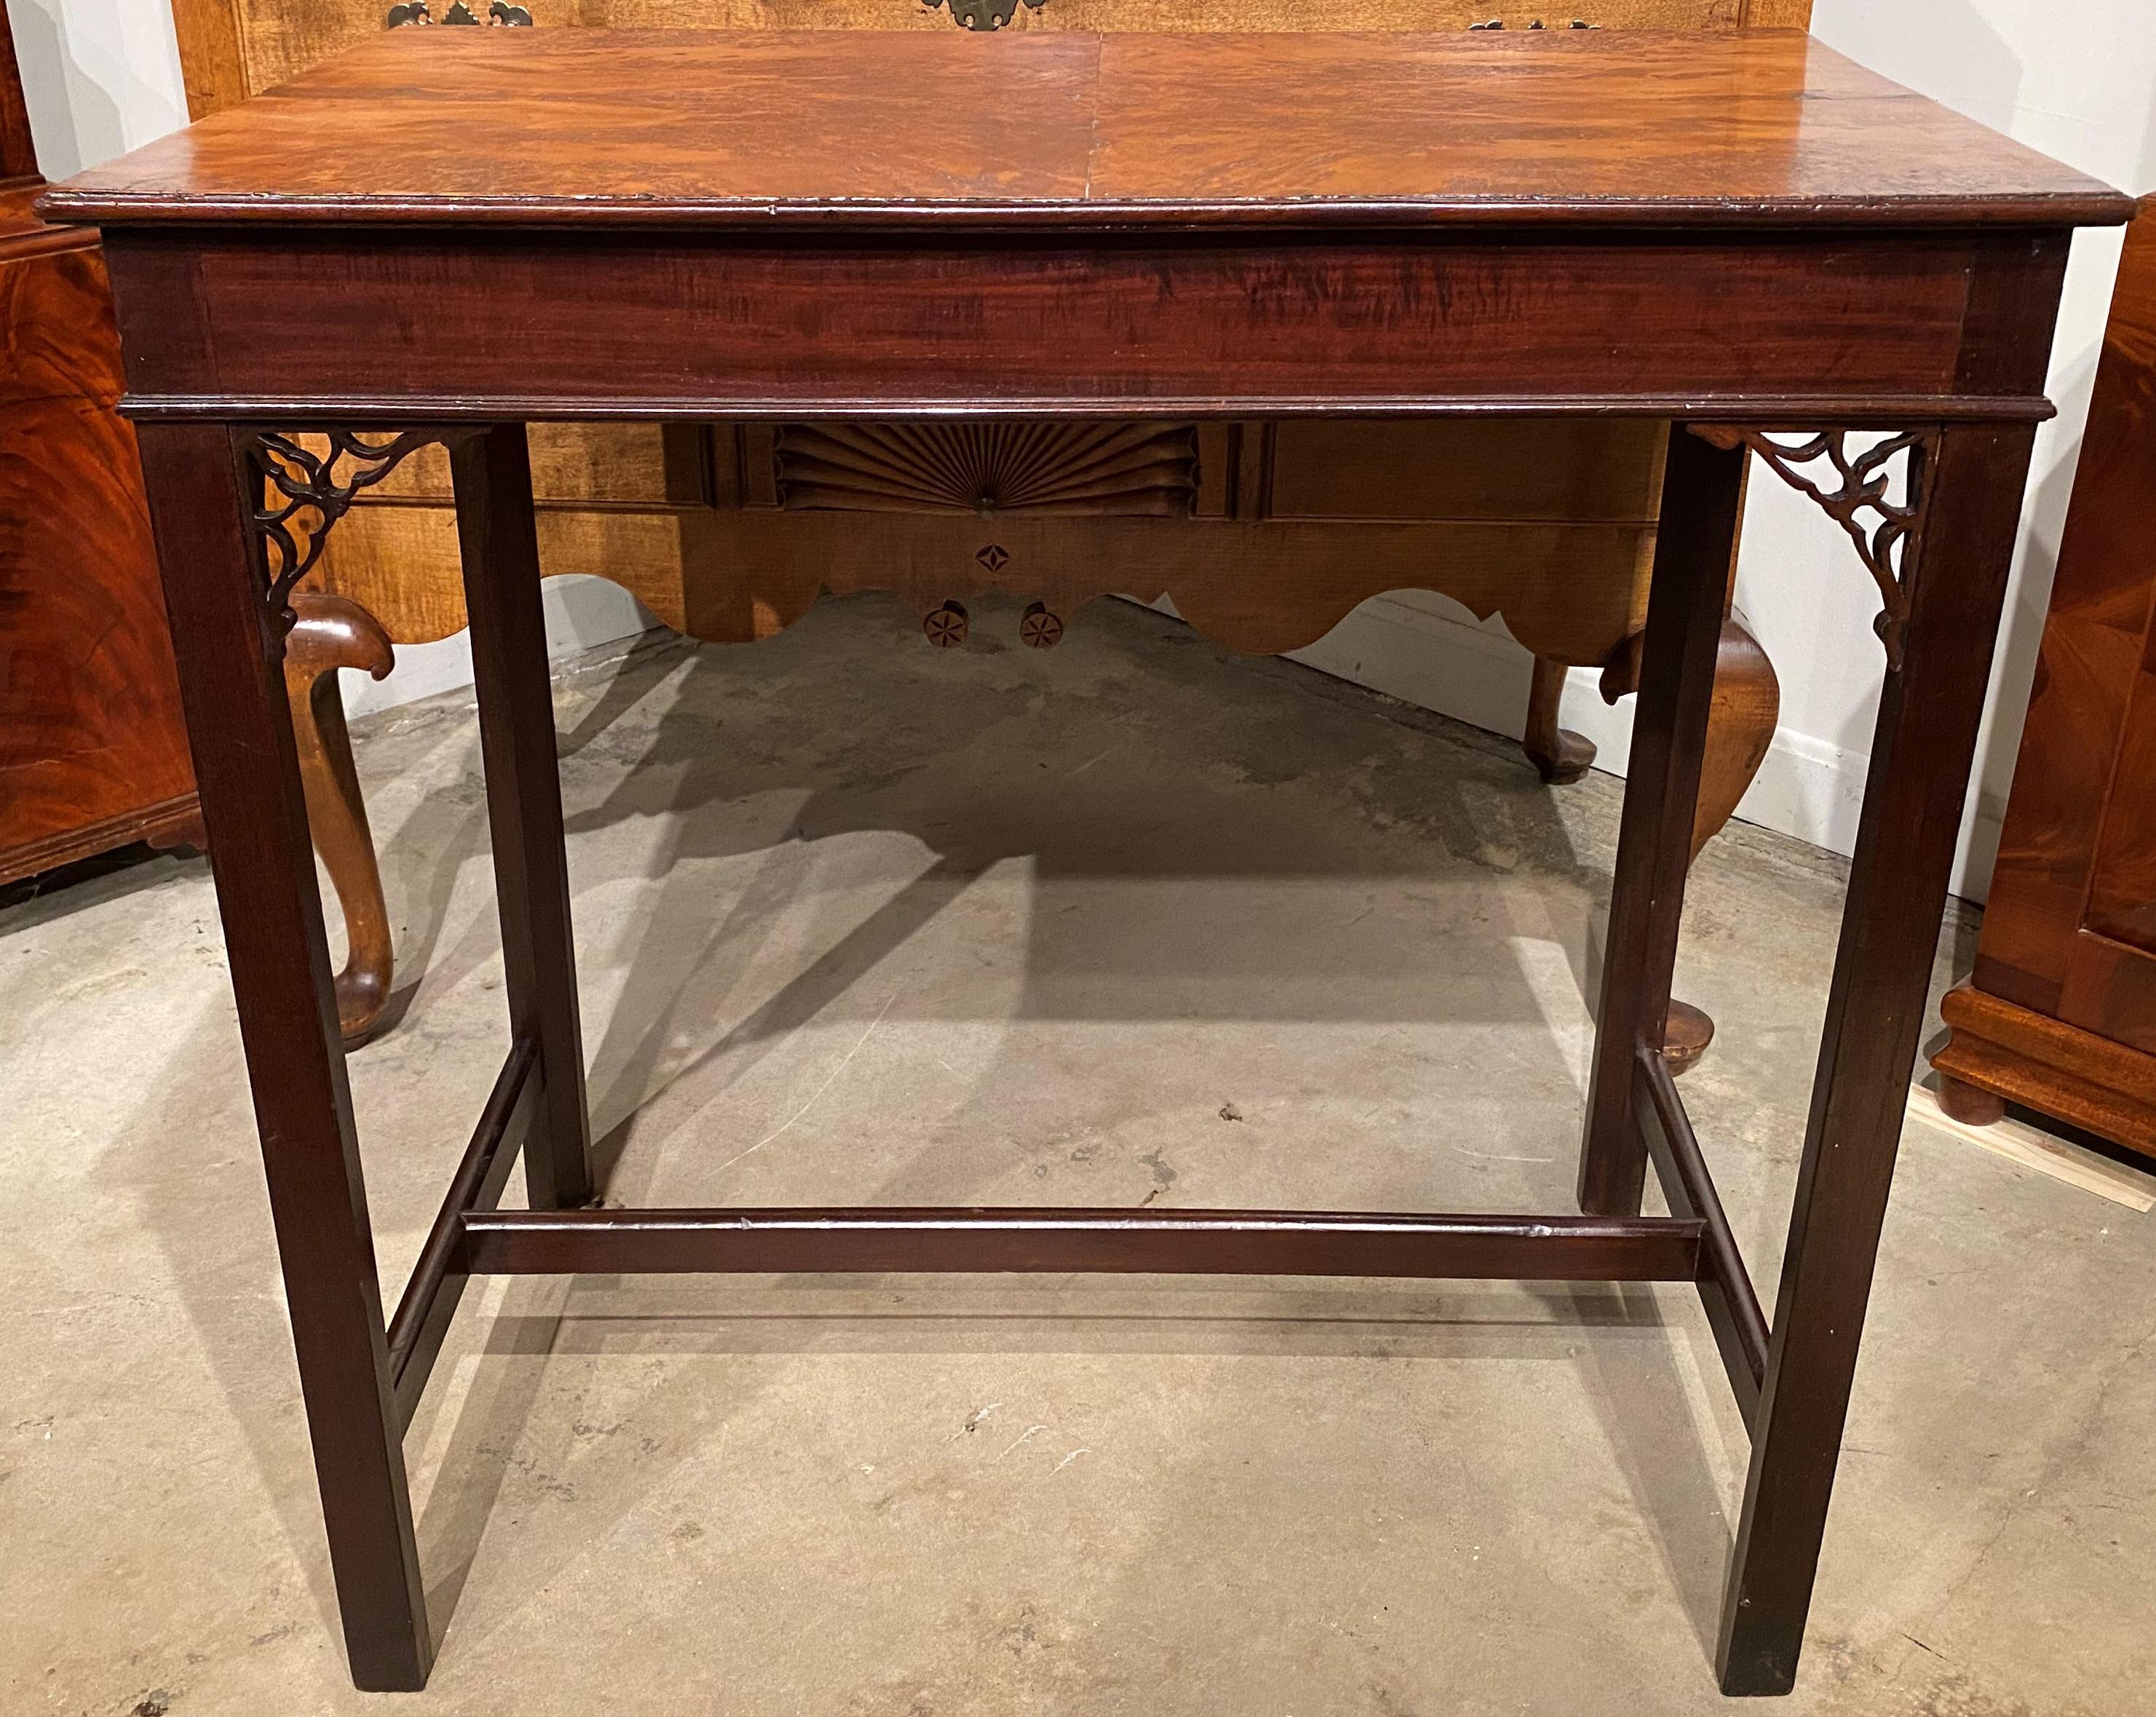 A fine example of a rectangular English mahogany tea table with fretwork leg supports, burled yew wood top, and H form base stretcher. The table is in very good condition, with a few minor losses on the fretwork and edges, and wear commensurate with